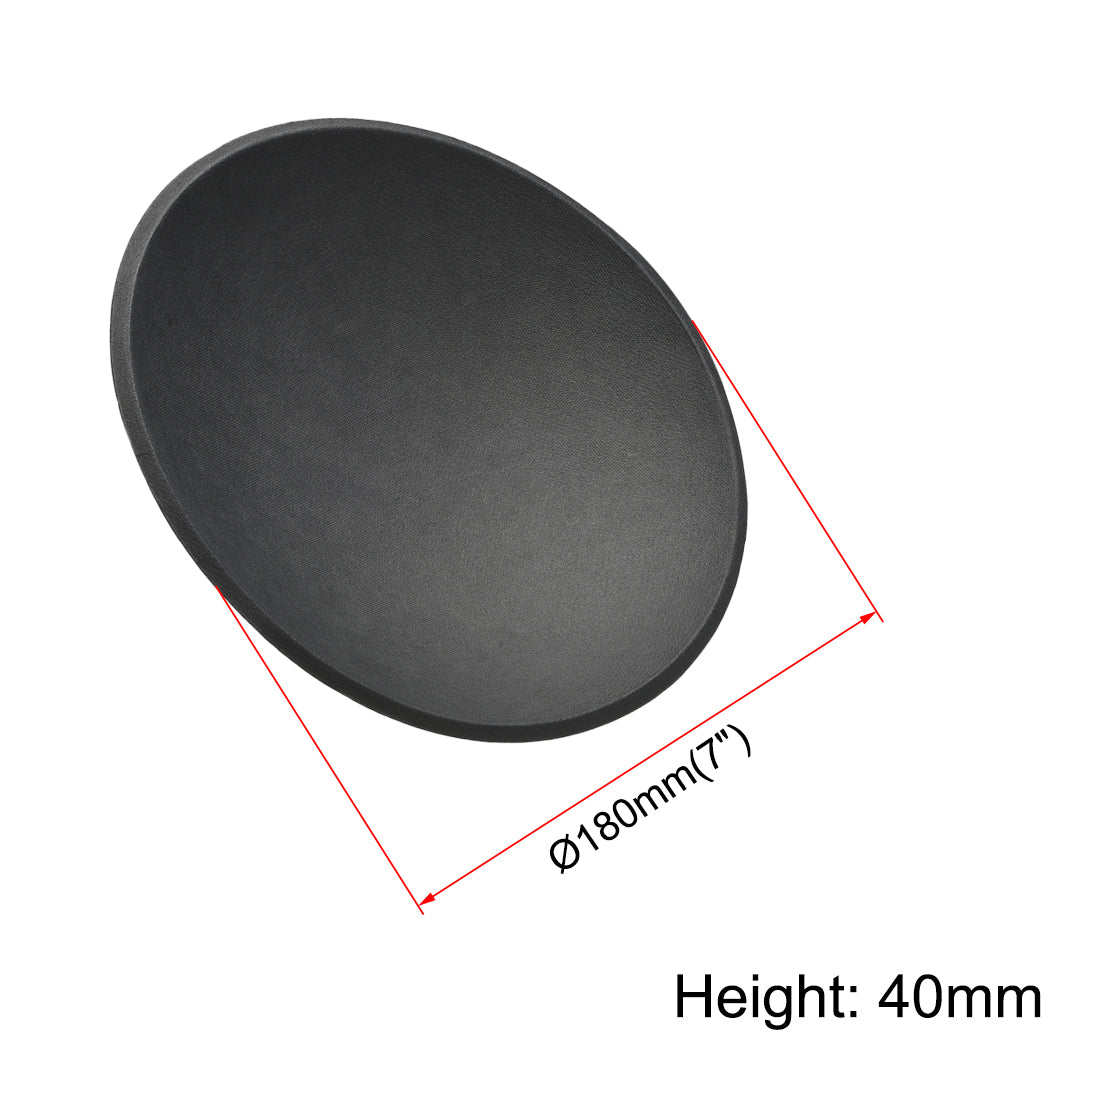 uxcell Uxcell Speaker Dust Cap 180mm/7" Diameter Subwoofer Paper Dome Coil Cover Caps